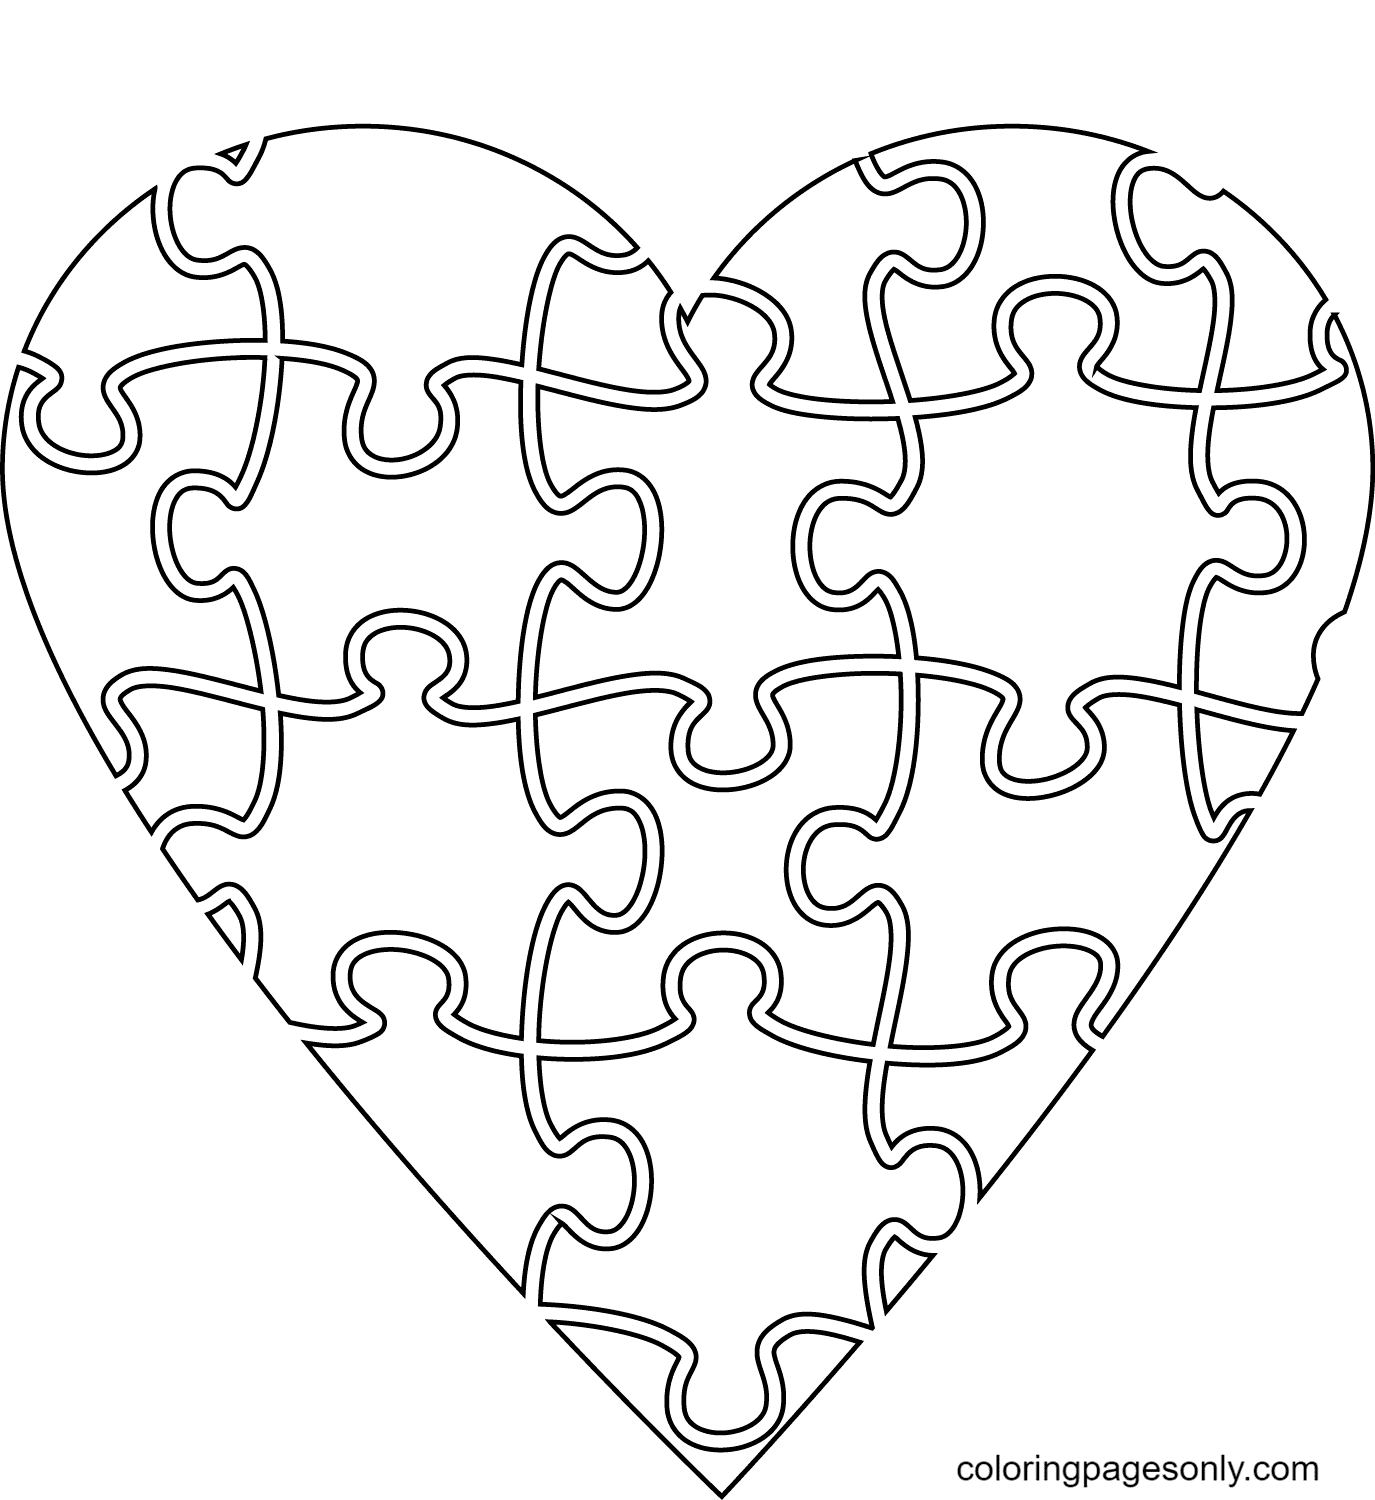 Heart Jigsaw Coloring Page